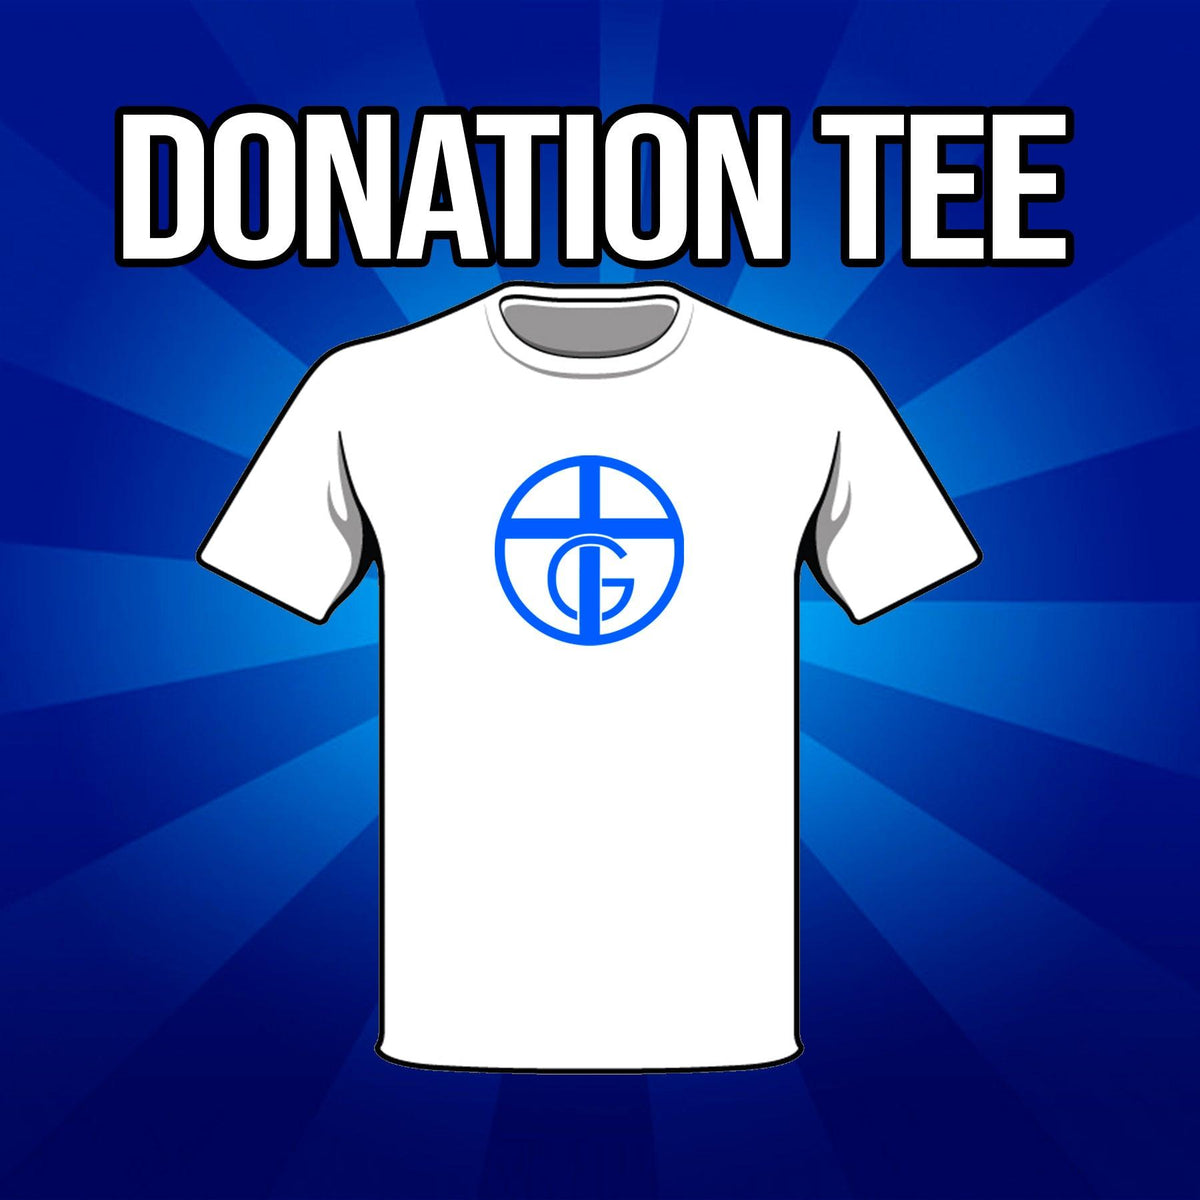 Donation Tee - Our True God